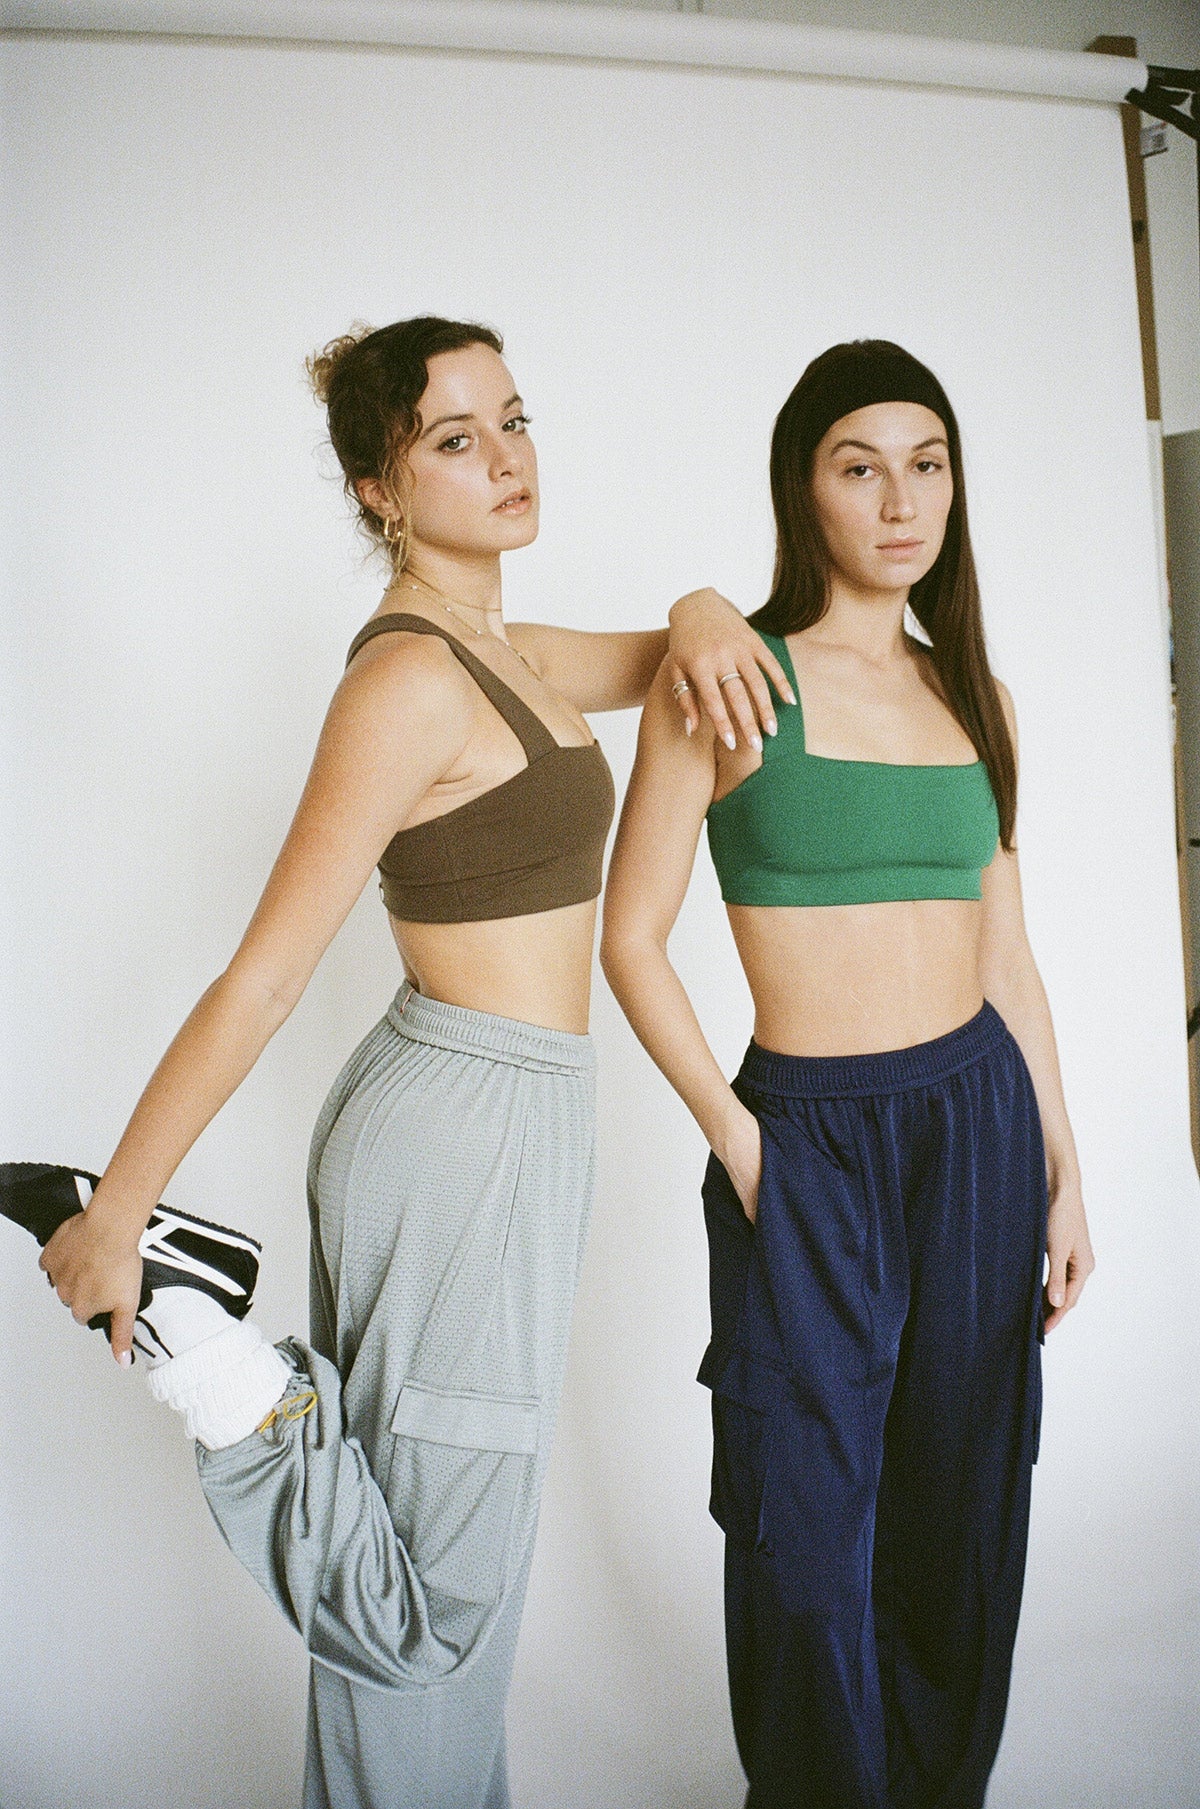 Image of WOA Models Wearing the Arena Pant in Mineral Grey and Classic Navy